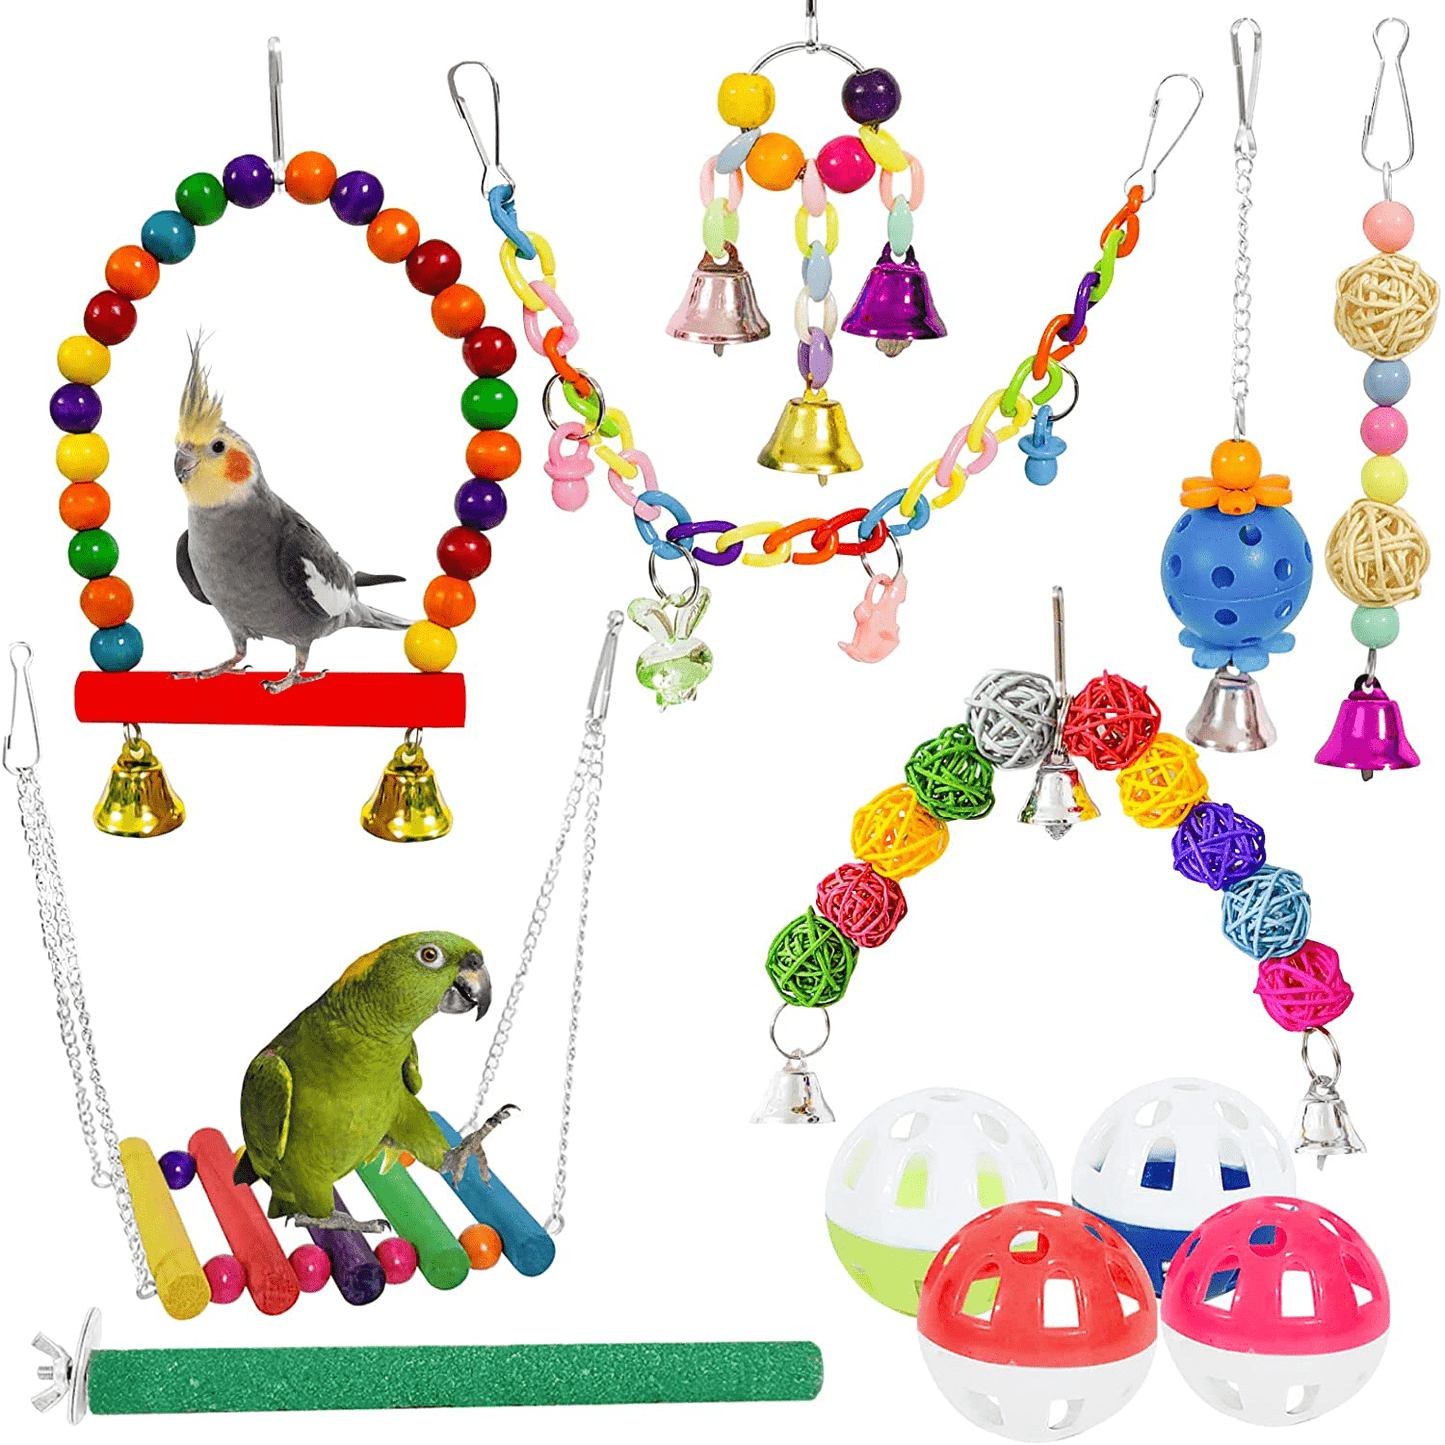 12 Packs Bird Toys Parrot Swing Toys - Chewing Hanging Bell Pet Birds Cage Toys Suitable for Small Parakeets, Conures, Love Birds, Cockatiels, Macaws, Finches